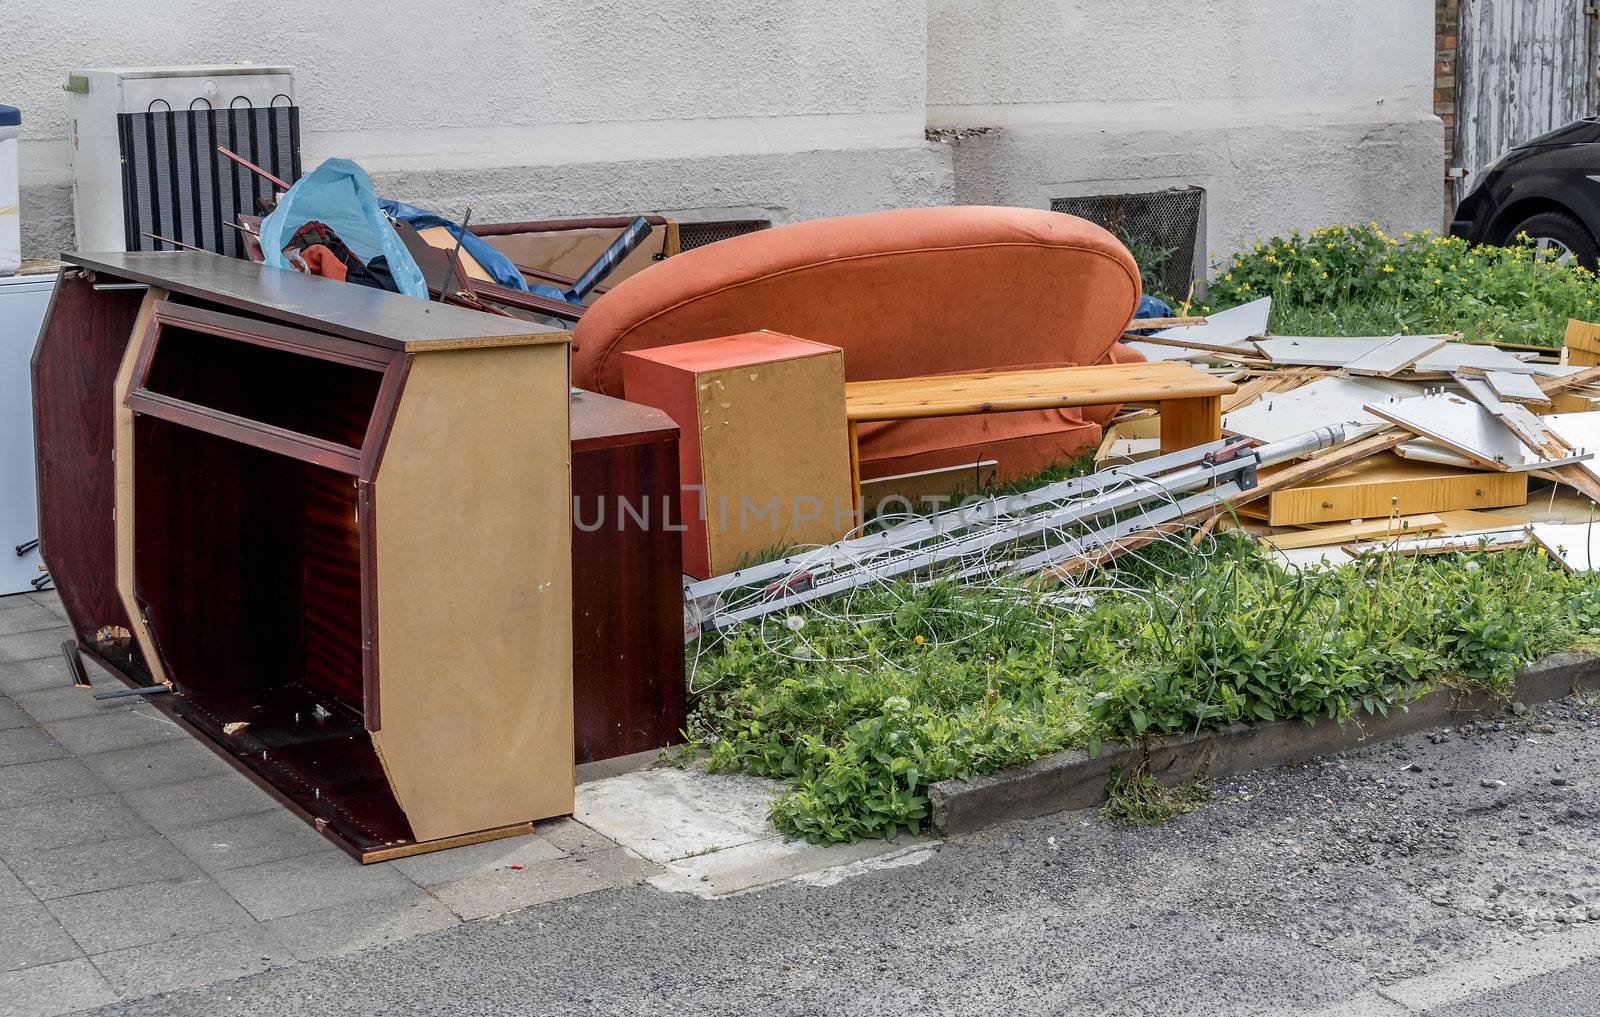 Bulky waste with cupboards, a sofa and furniture on the lawn in front of an apartment building by geogif